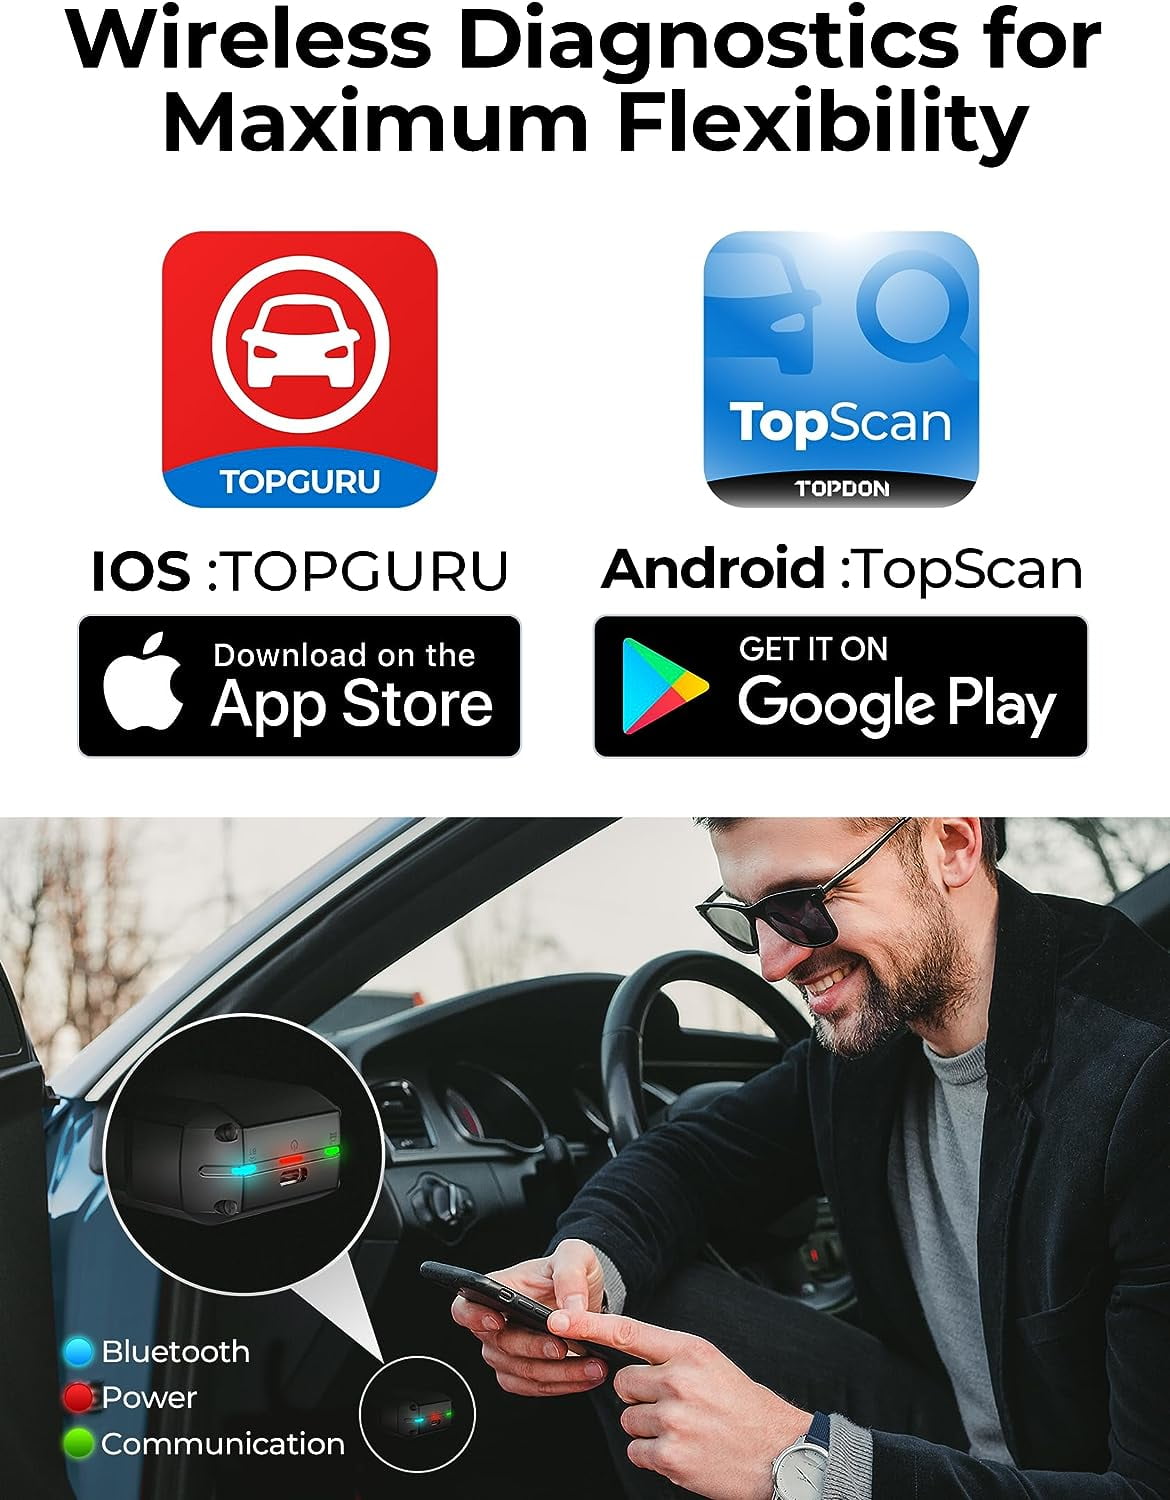 Android Apps by Topdon on Google Play